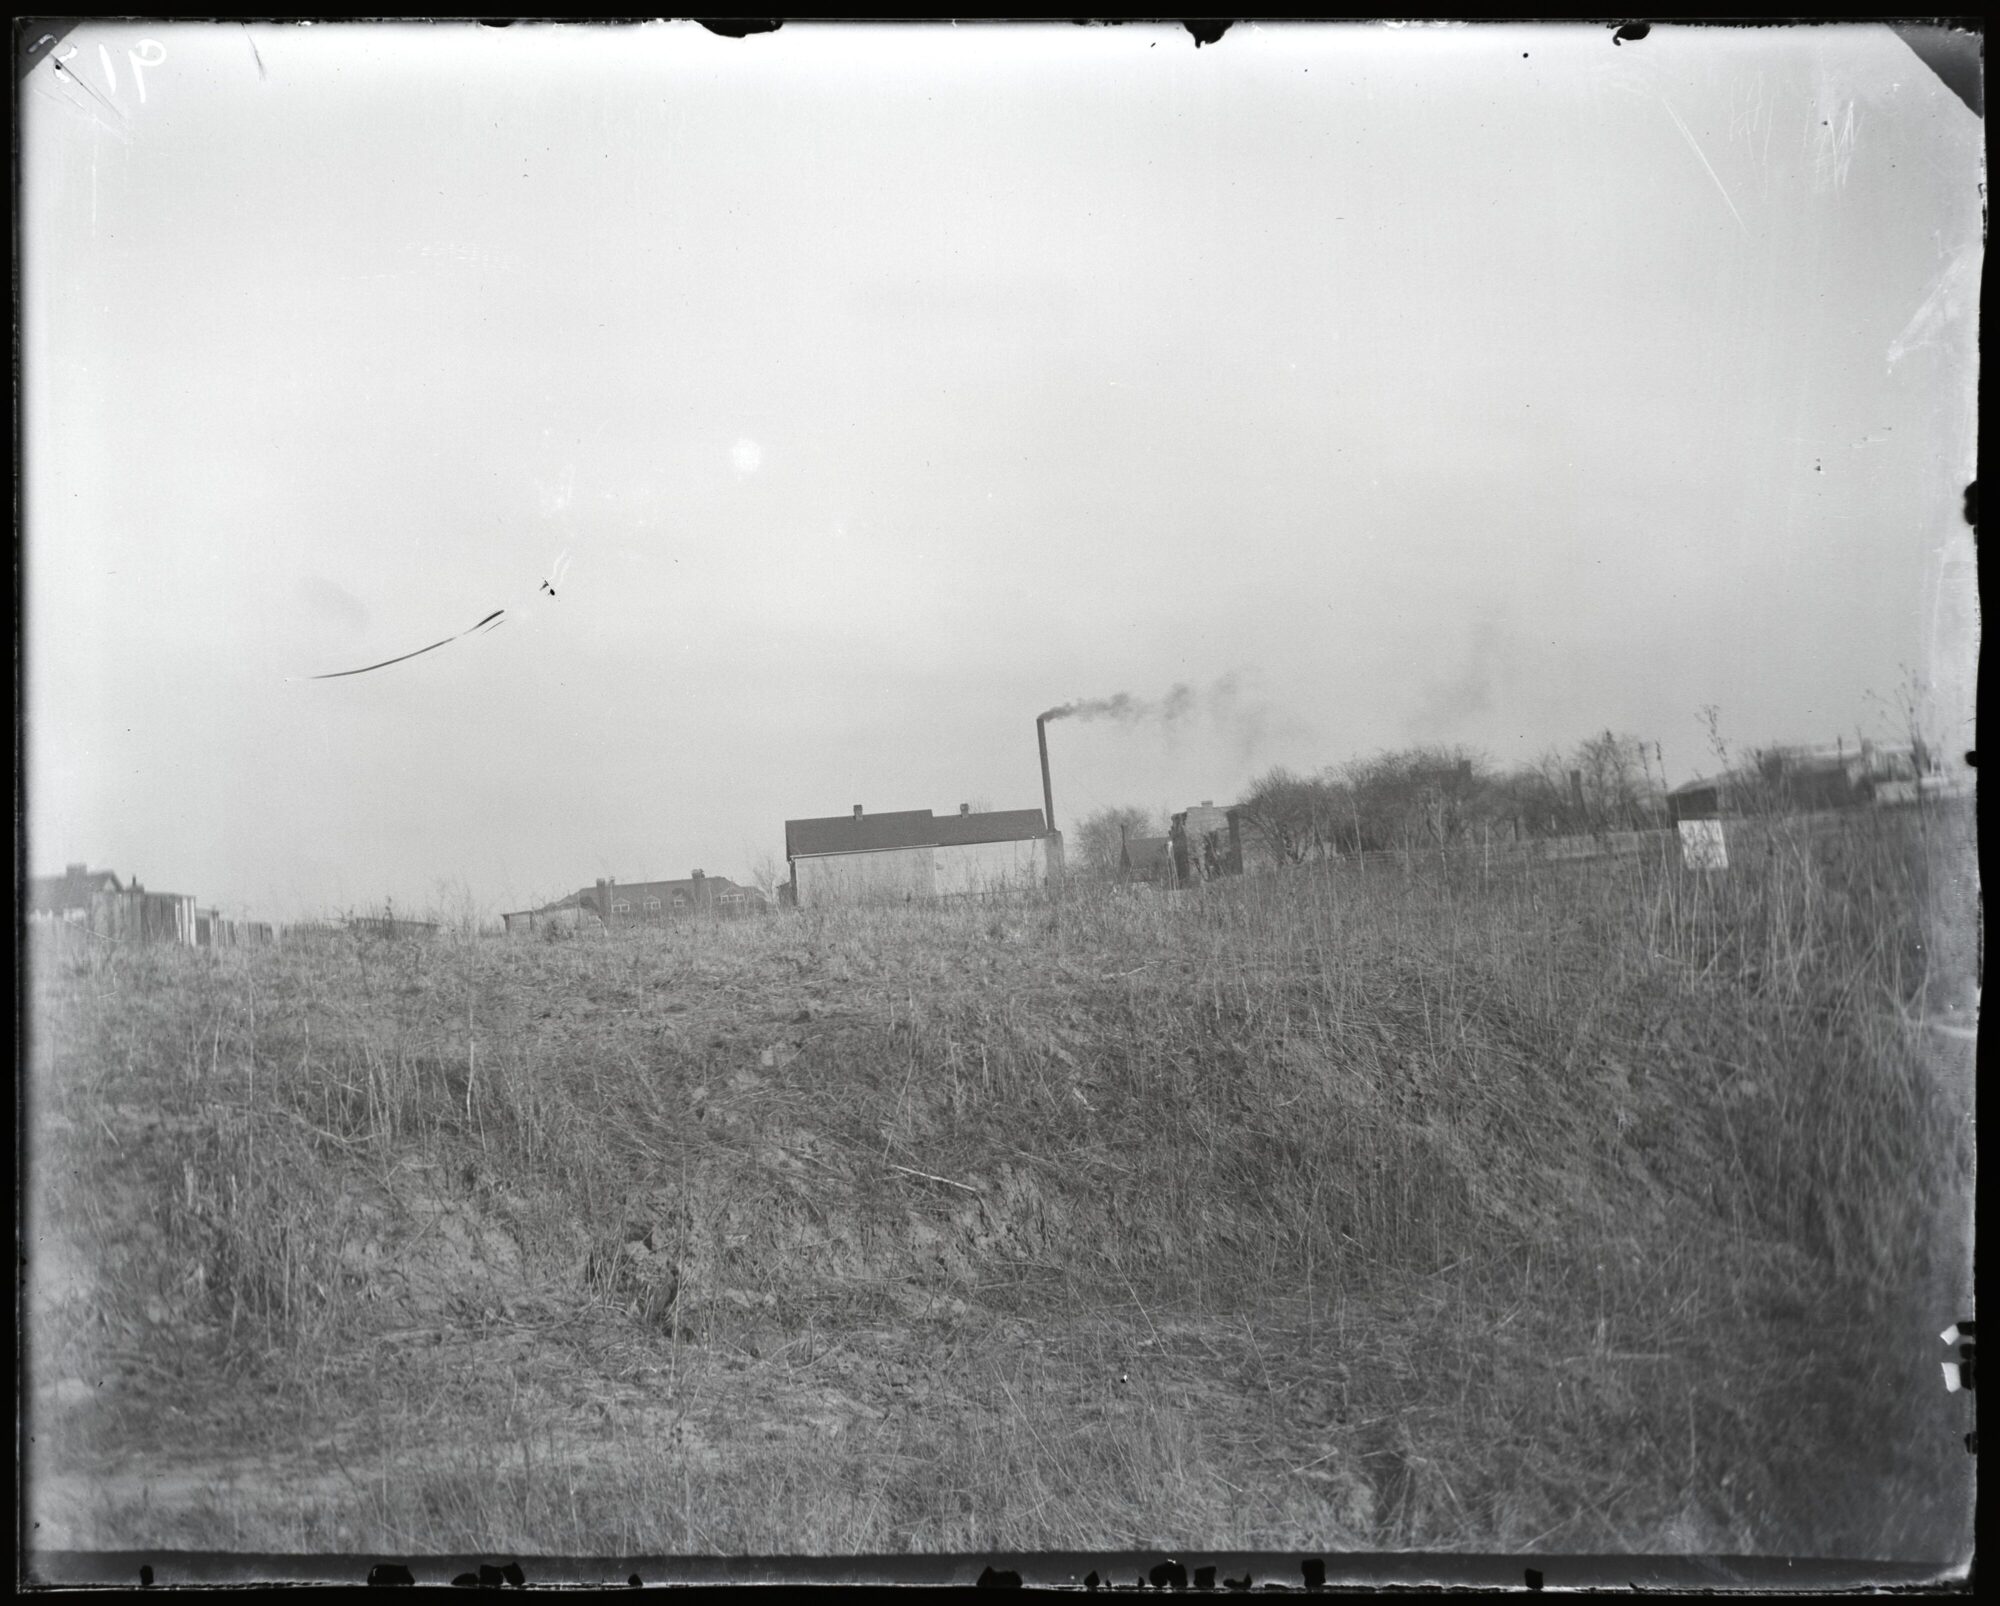 Black and white photograph of the House of Refuge in St. Louis. At center is an unadorned building with a smokestack. Additional buildings are blurry but visible in the background. The foreground is an overgrown grassy expanse.